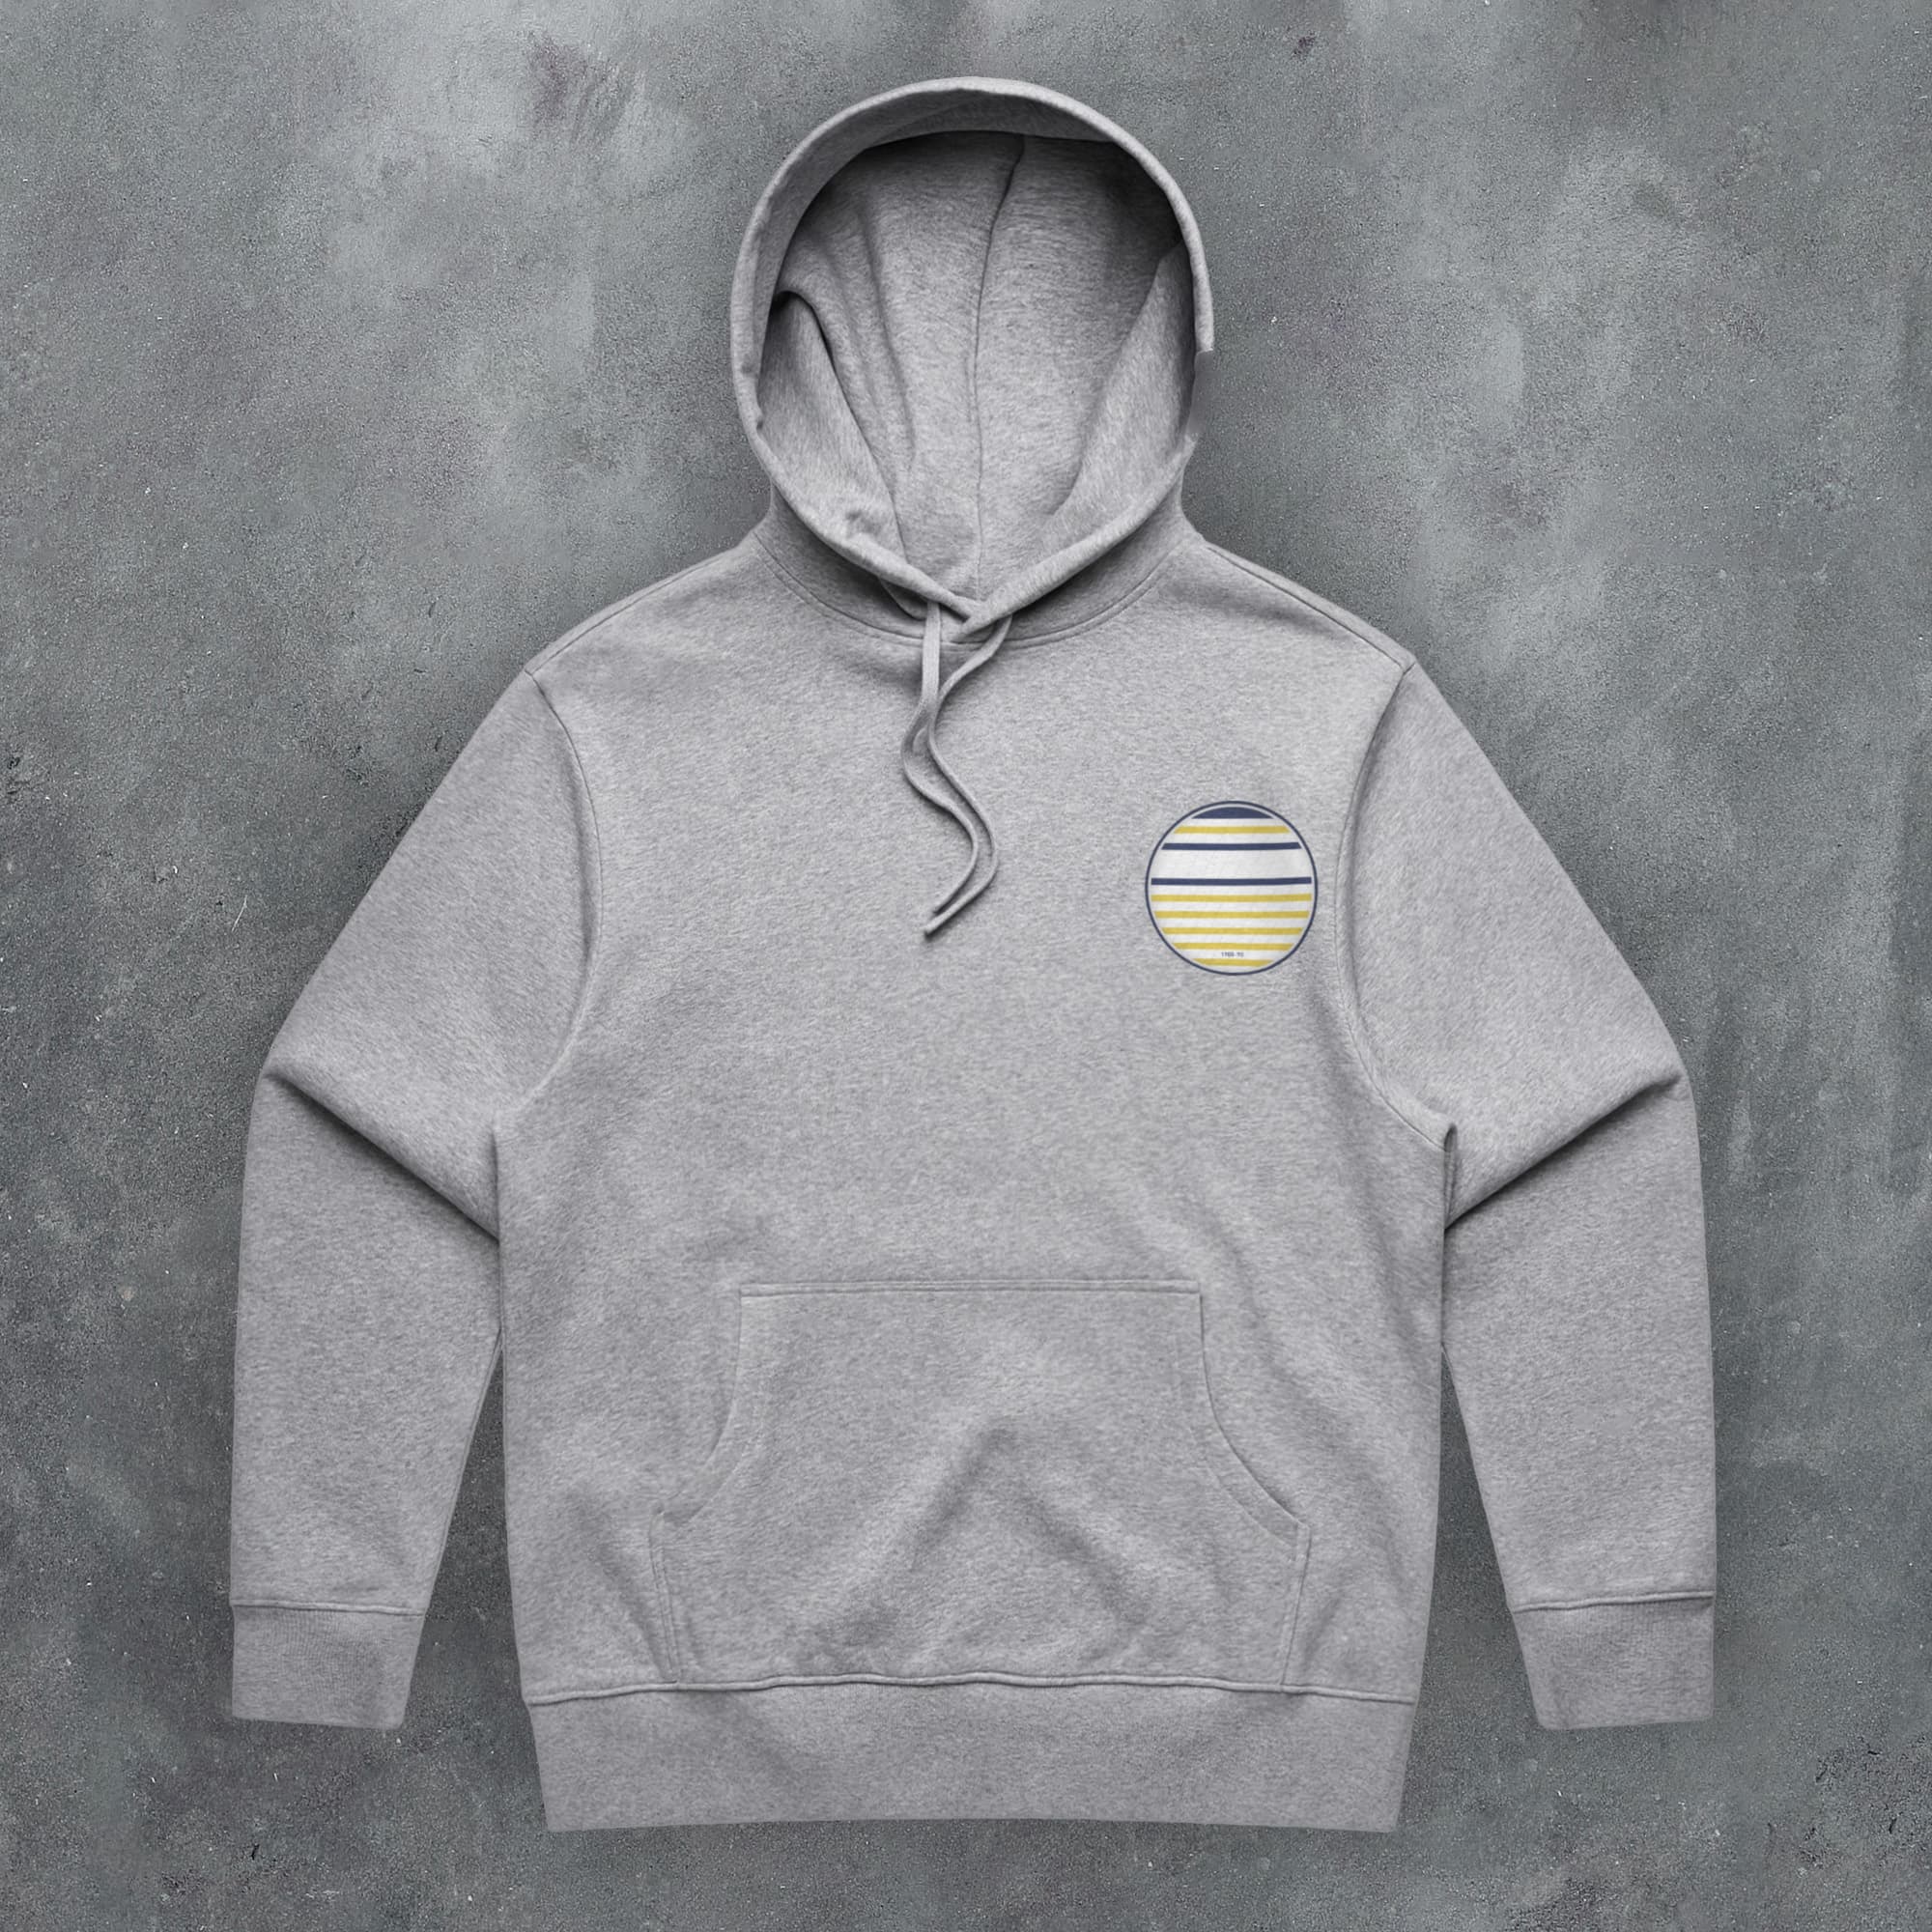 a grey hoodie with a yellow stripe on the chest